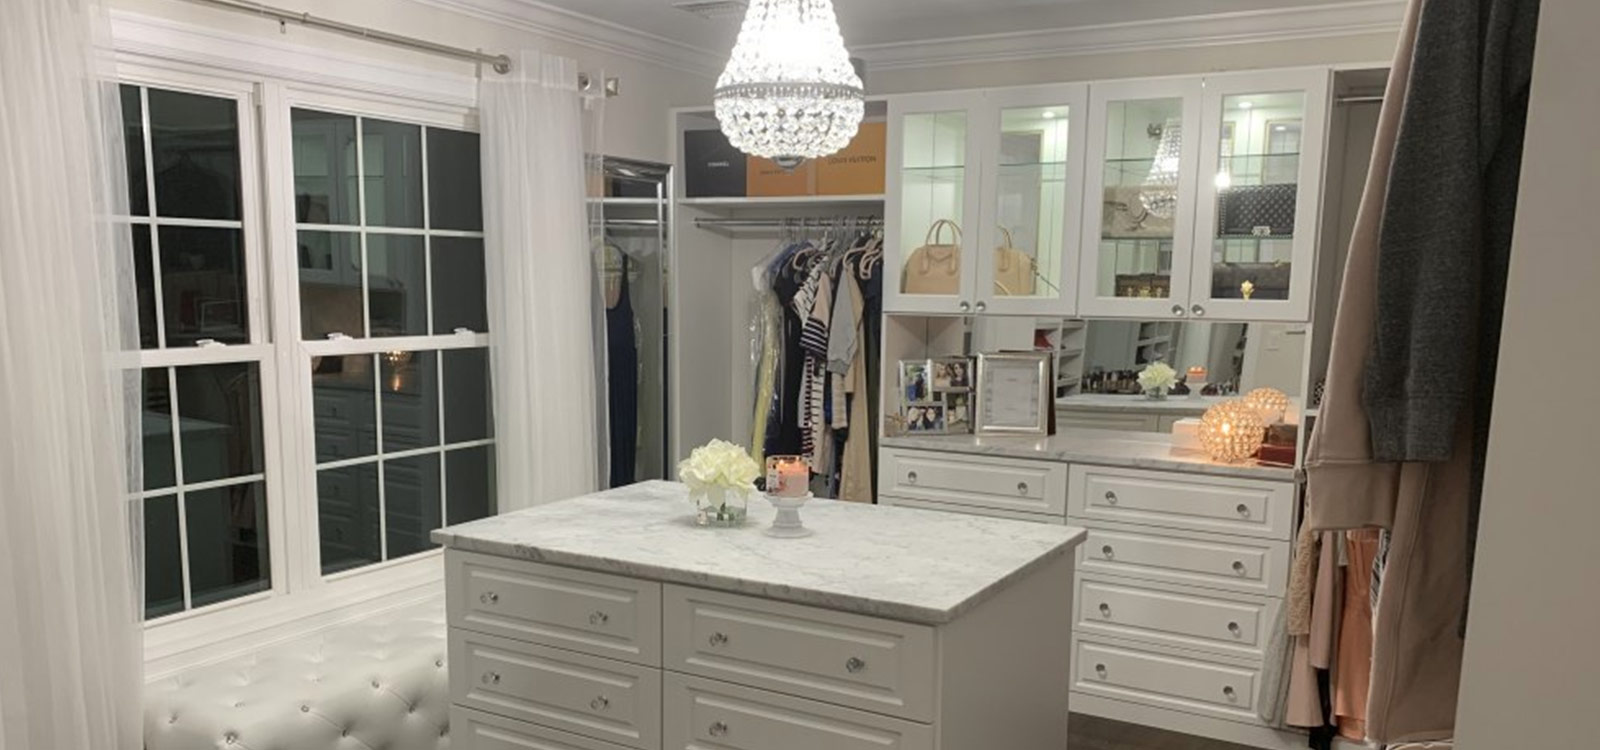 We offer Custom Closets and Storage Solutions in Long Island & New York